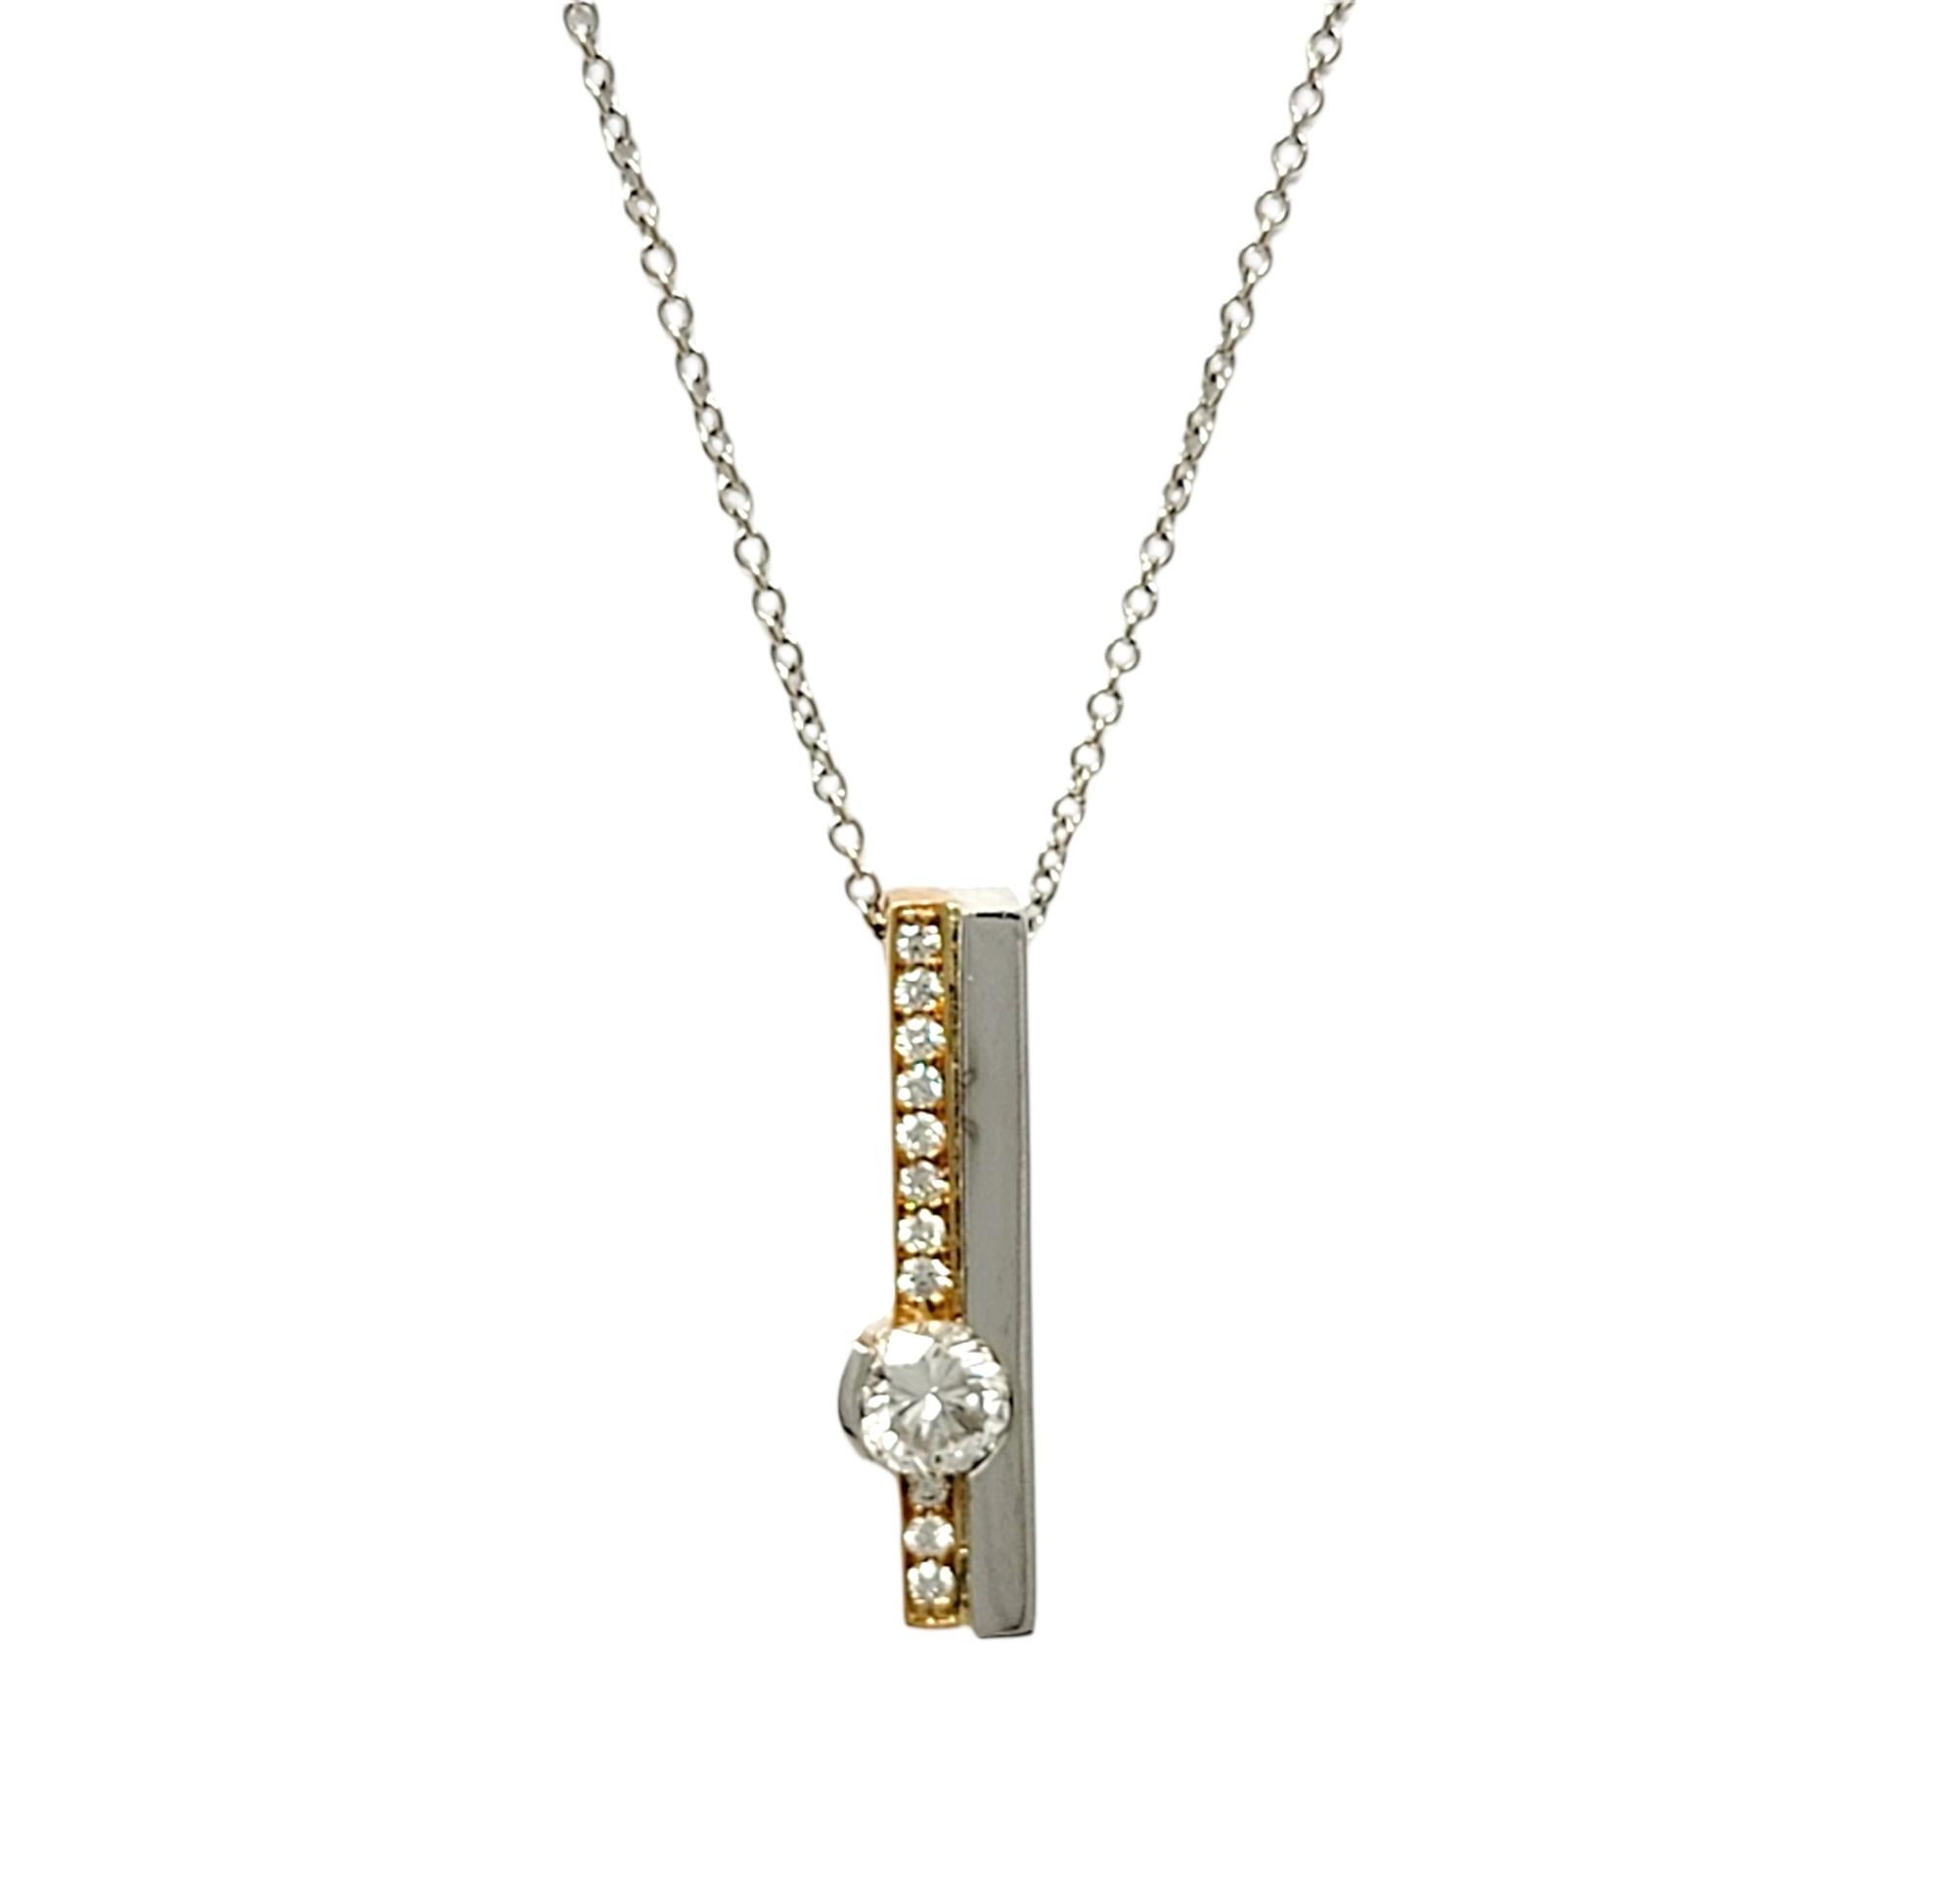 Gorgeous, contemporary necklace with sleek double bar shape. The pendant is 18 karat yellow gold and white palladium. The chain is 14 karat white gold The pendant main diamond is semi bezel set and is round brilliant cut, approximately .51 carats,